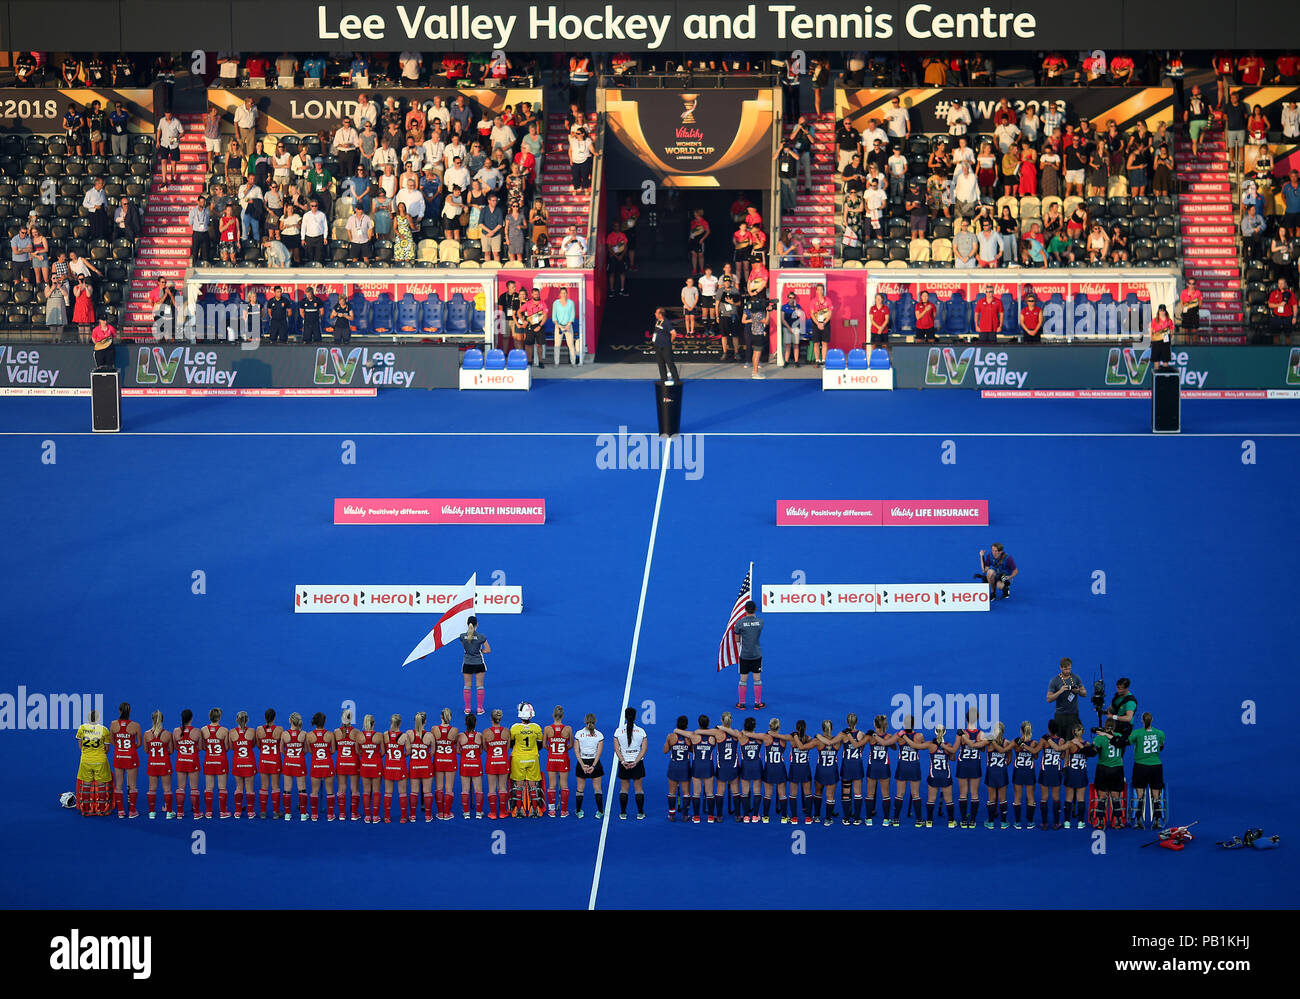 General view of England vs USA during the national anthem during the Vitality Women's Hockey World Cup match at The Lee Valley Hockey and tennis Centre, London. PRESS ASSOCIATION Photo, Picture date: Wednesday July 25, 2018. Photo credit should read: Steven Paston/PA Wire. Stock Photo